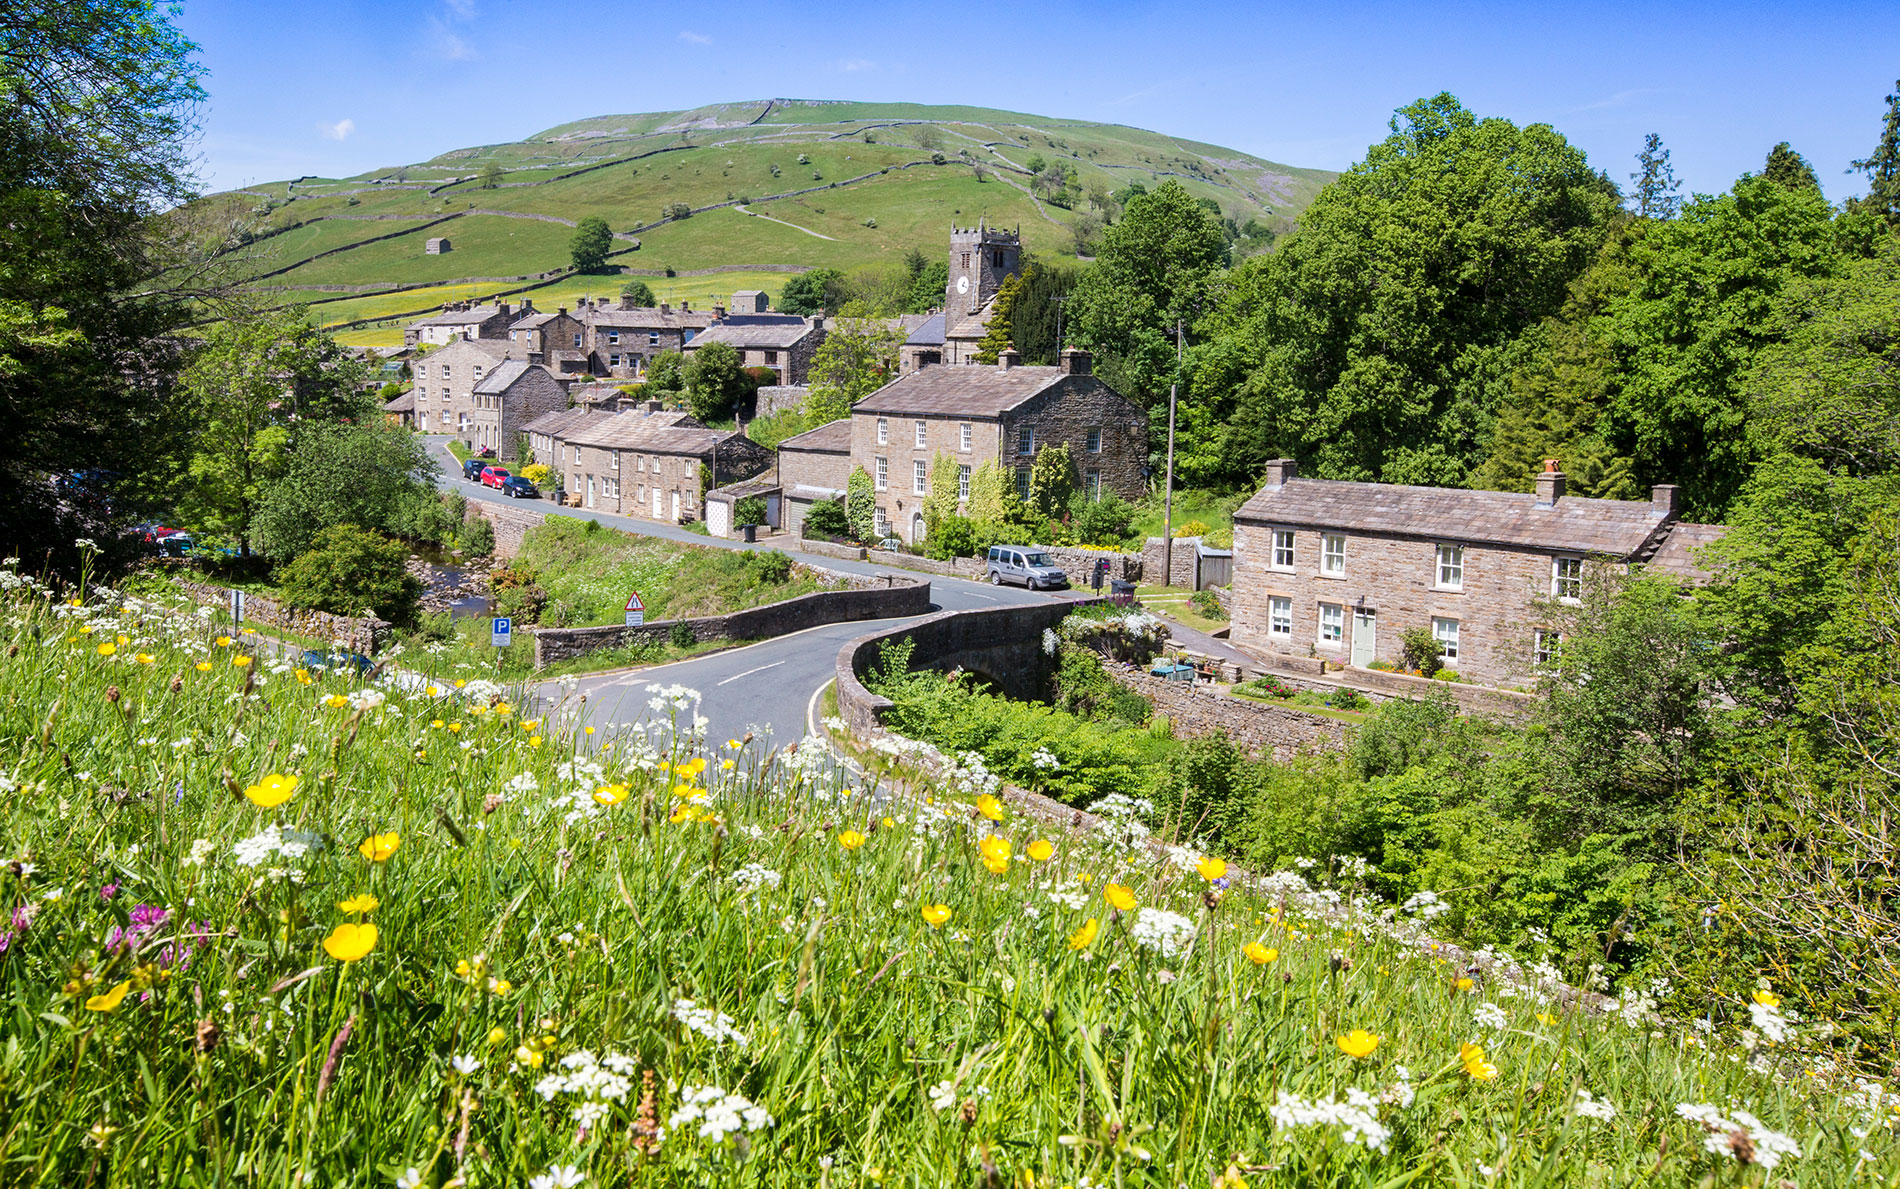 Scenic Drives in the Yorkshire Dales